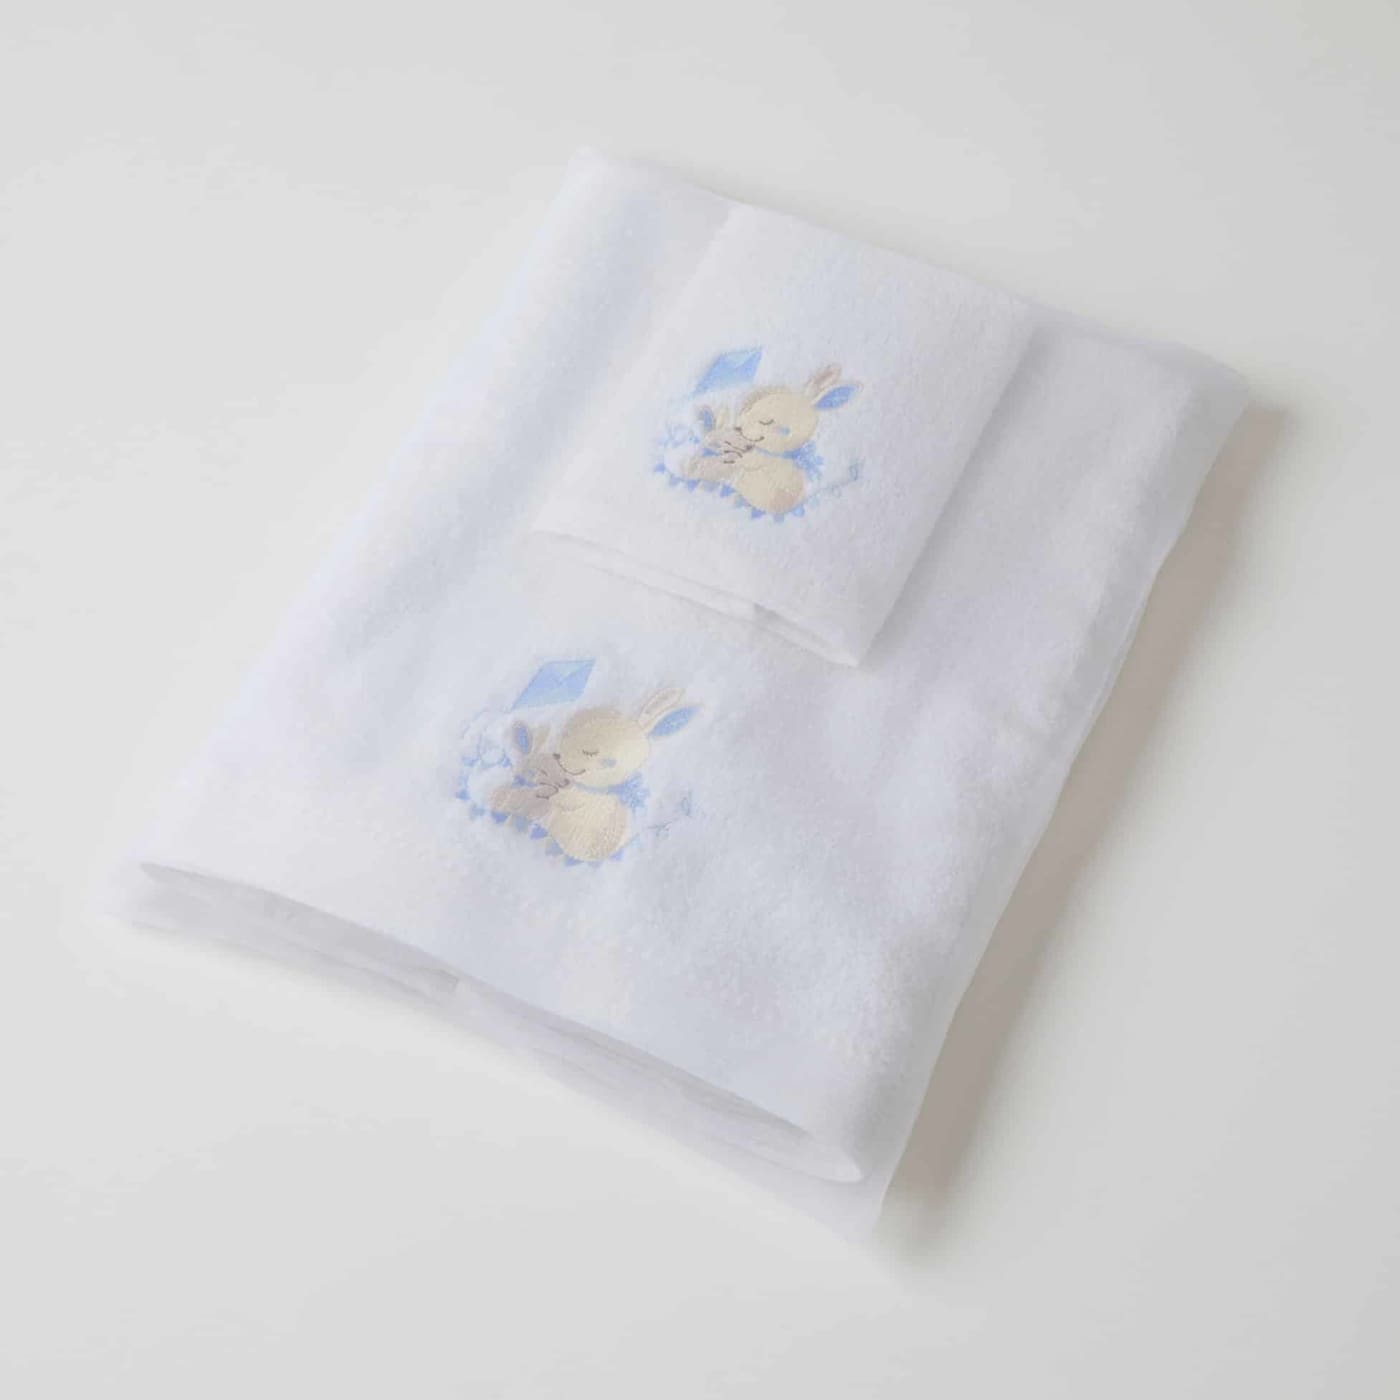 Jiggle & Giggle Towel & Face Washer Set in Organza Bag - Blue Bunny - Blue Bunny - BATHTIME & CHANGING - TOWELS/WASHERS